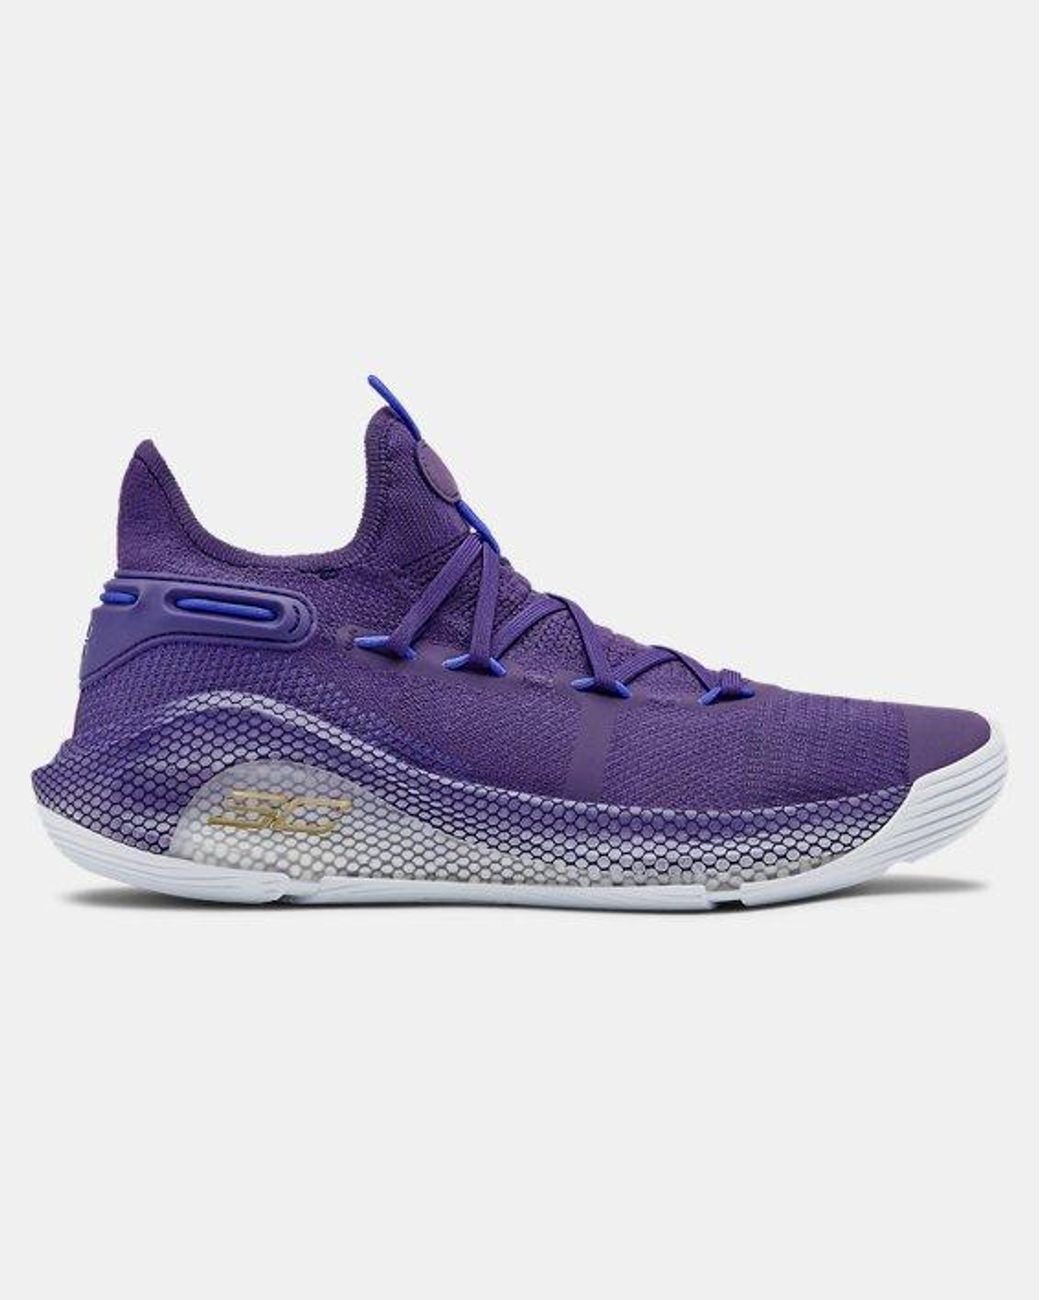 curry 6 purple sneakers